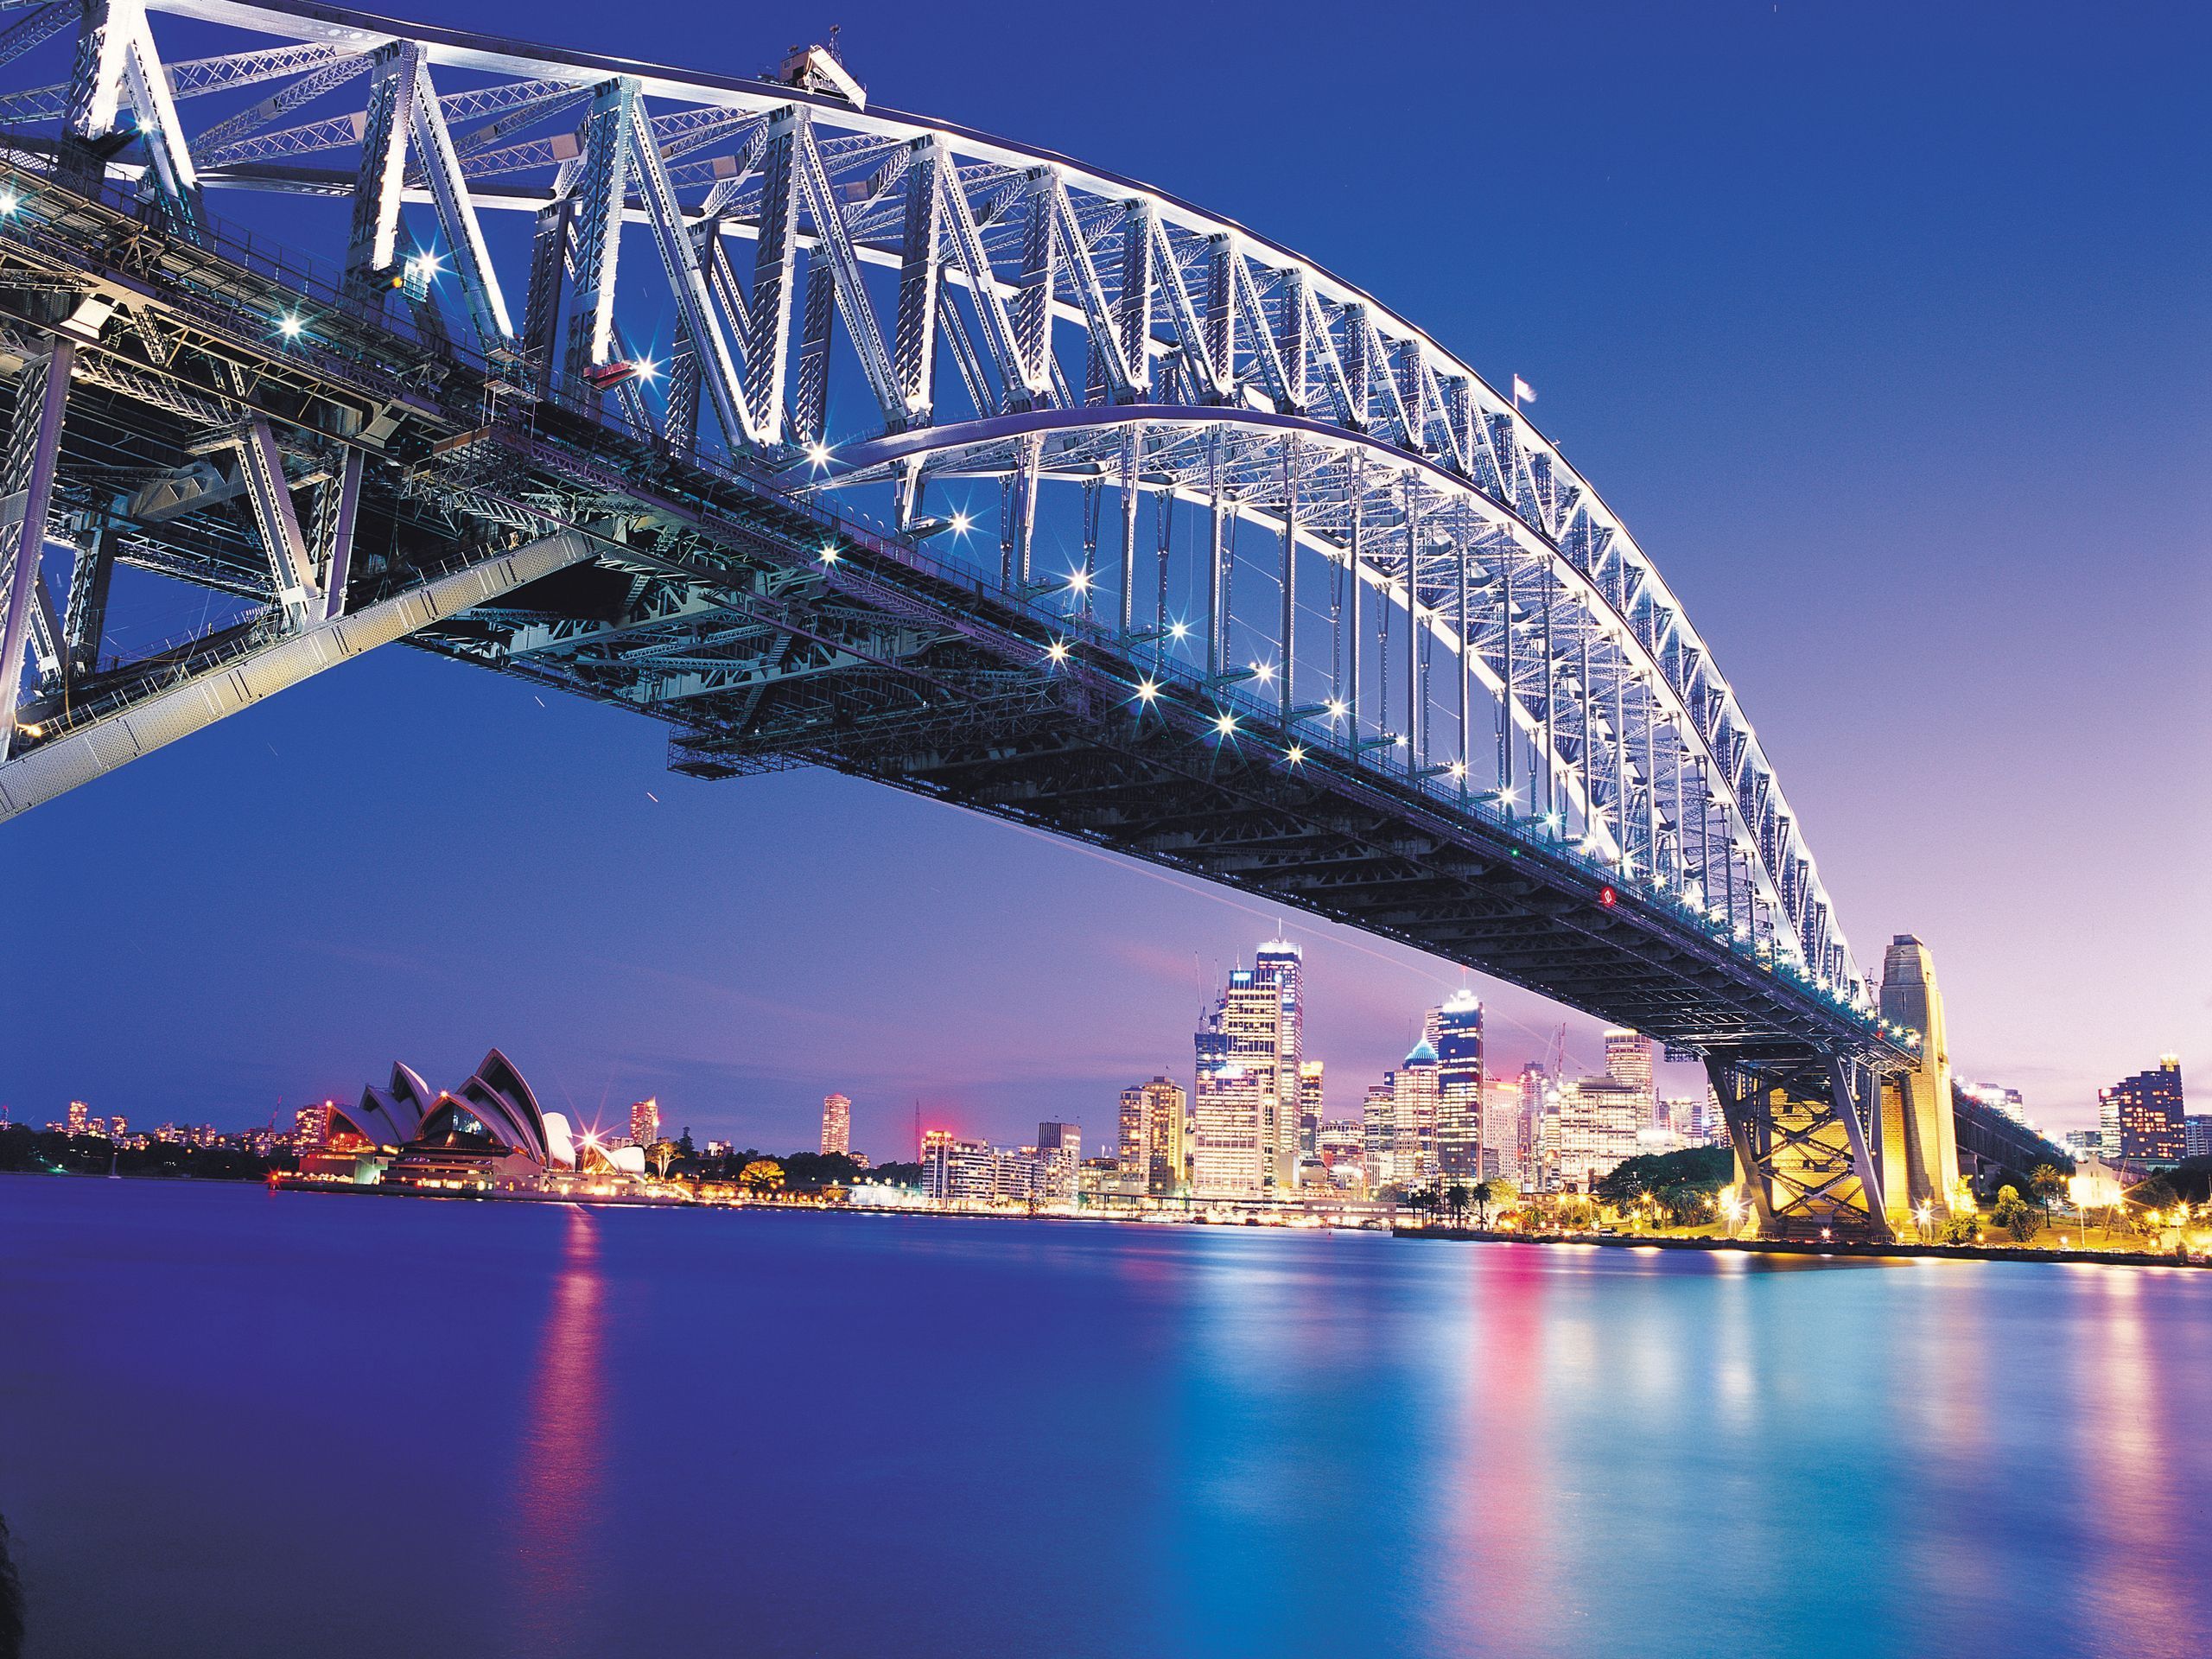 Sydney Free Desktop Wallpapers for HD, Widescreen and Mobile